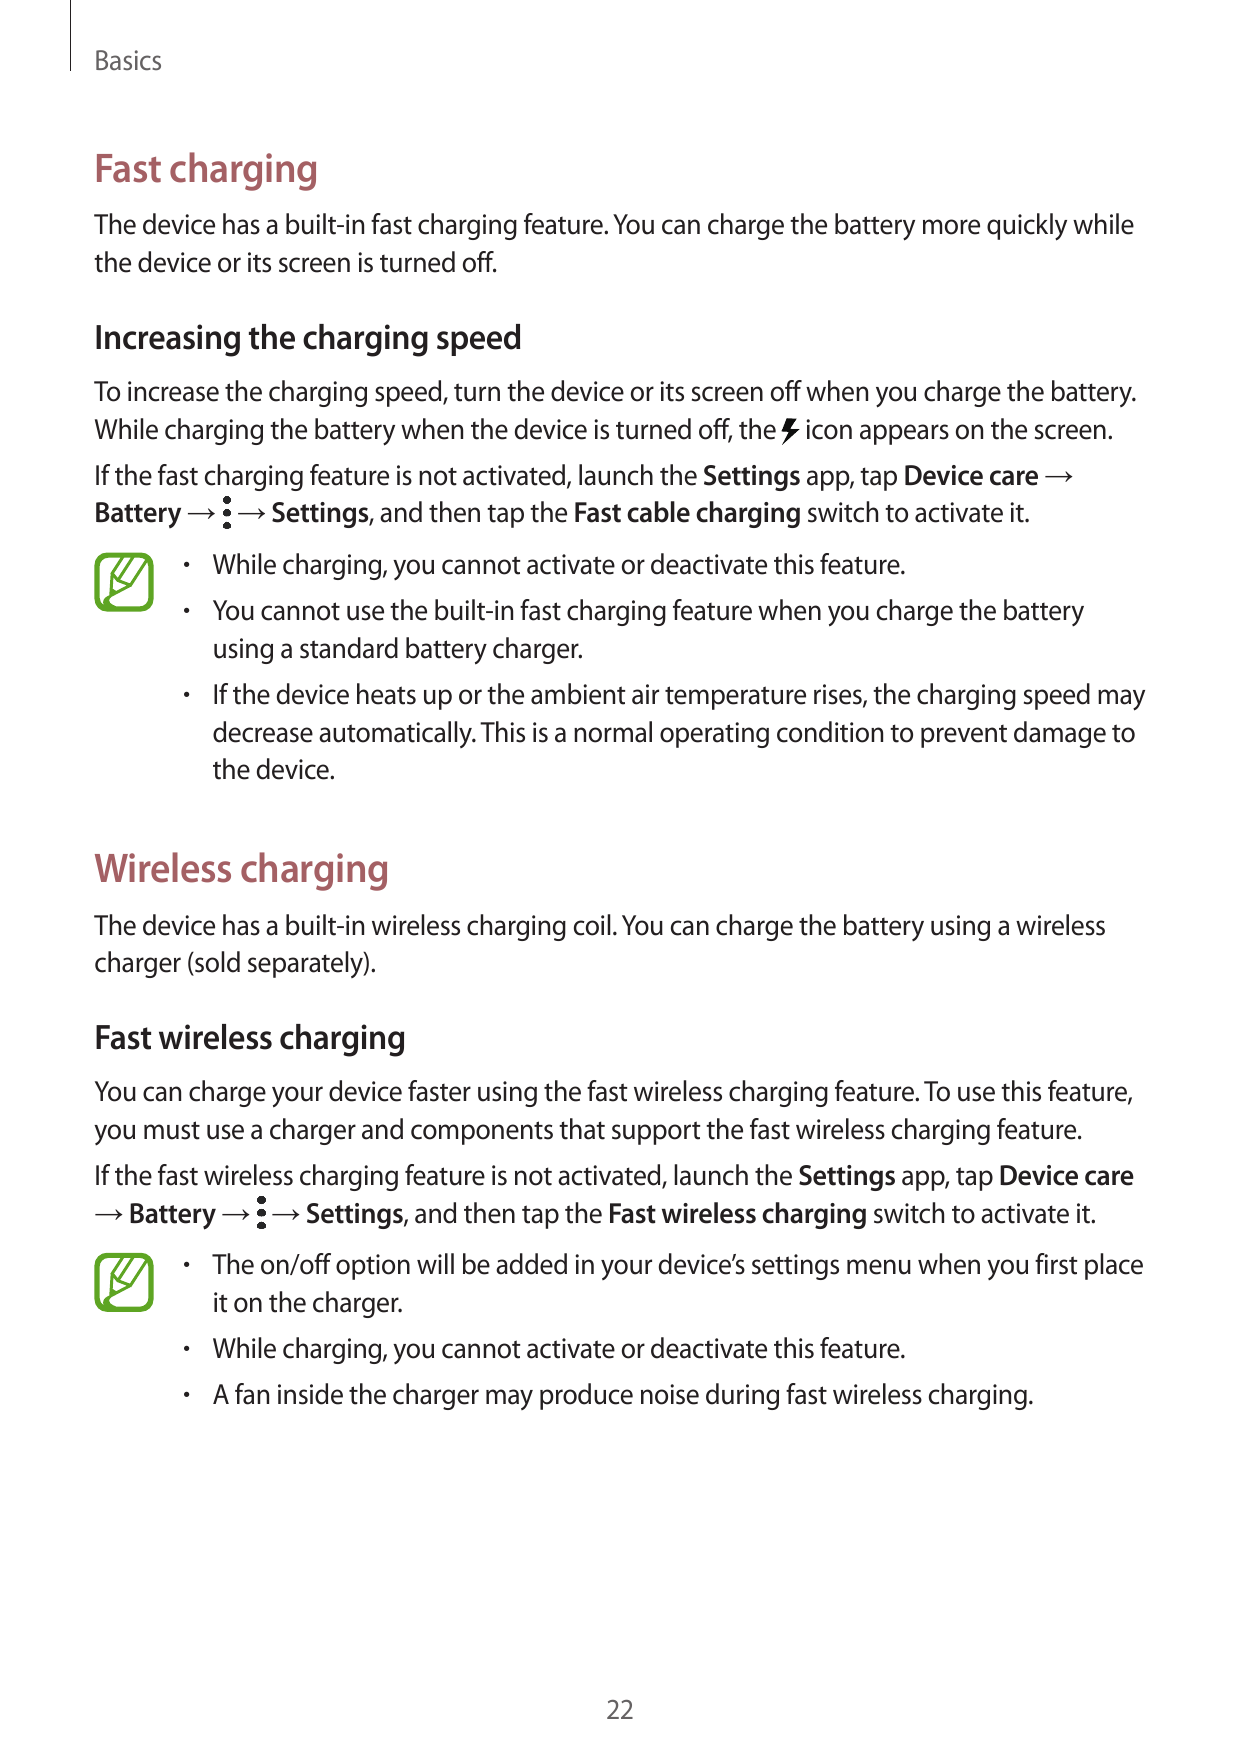 BasicsFast chargingThe device has a built-in fast charging feature. You can charge the battery more quickly whilethe device or i